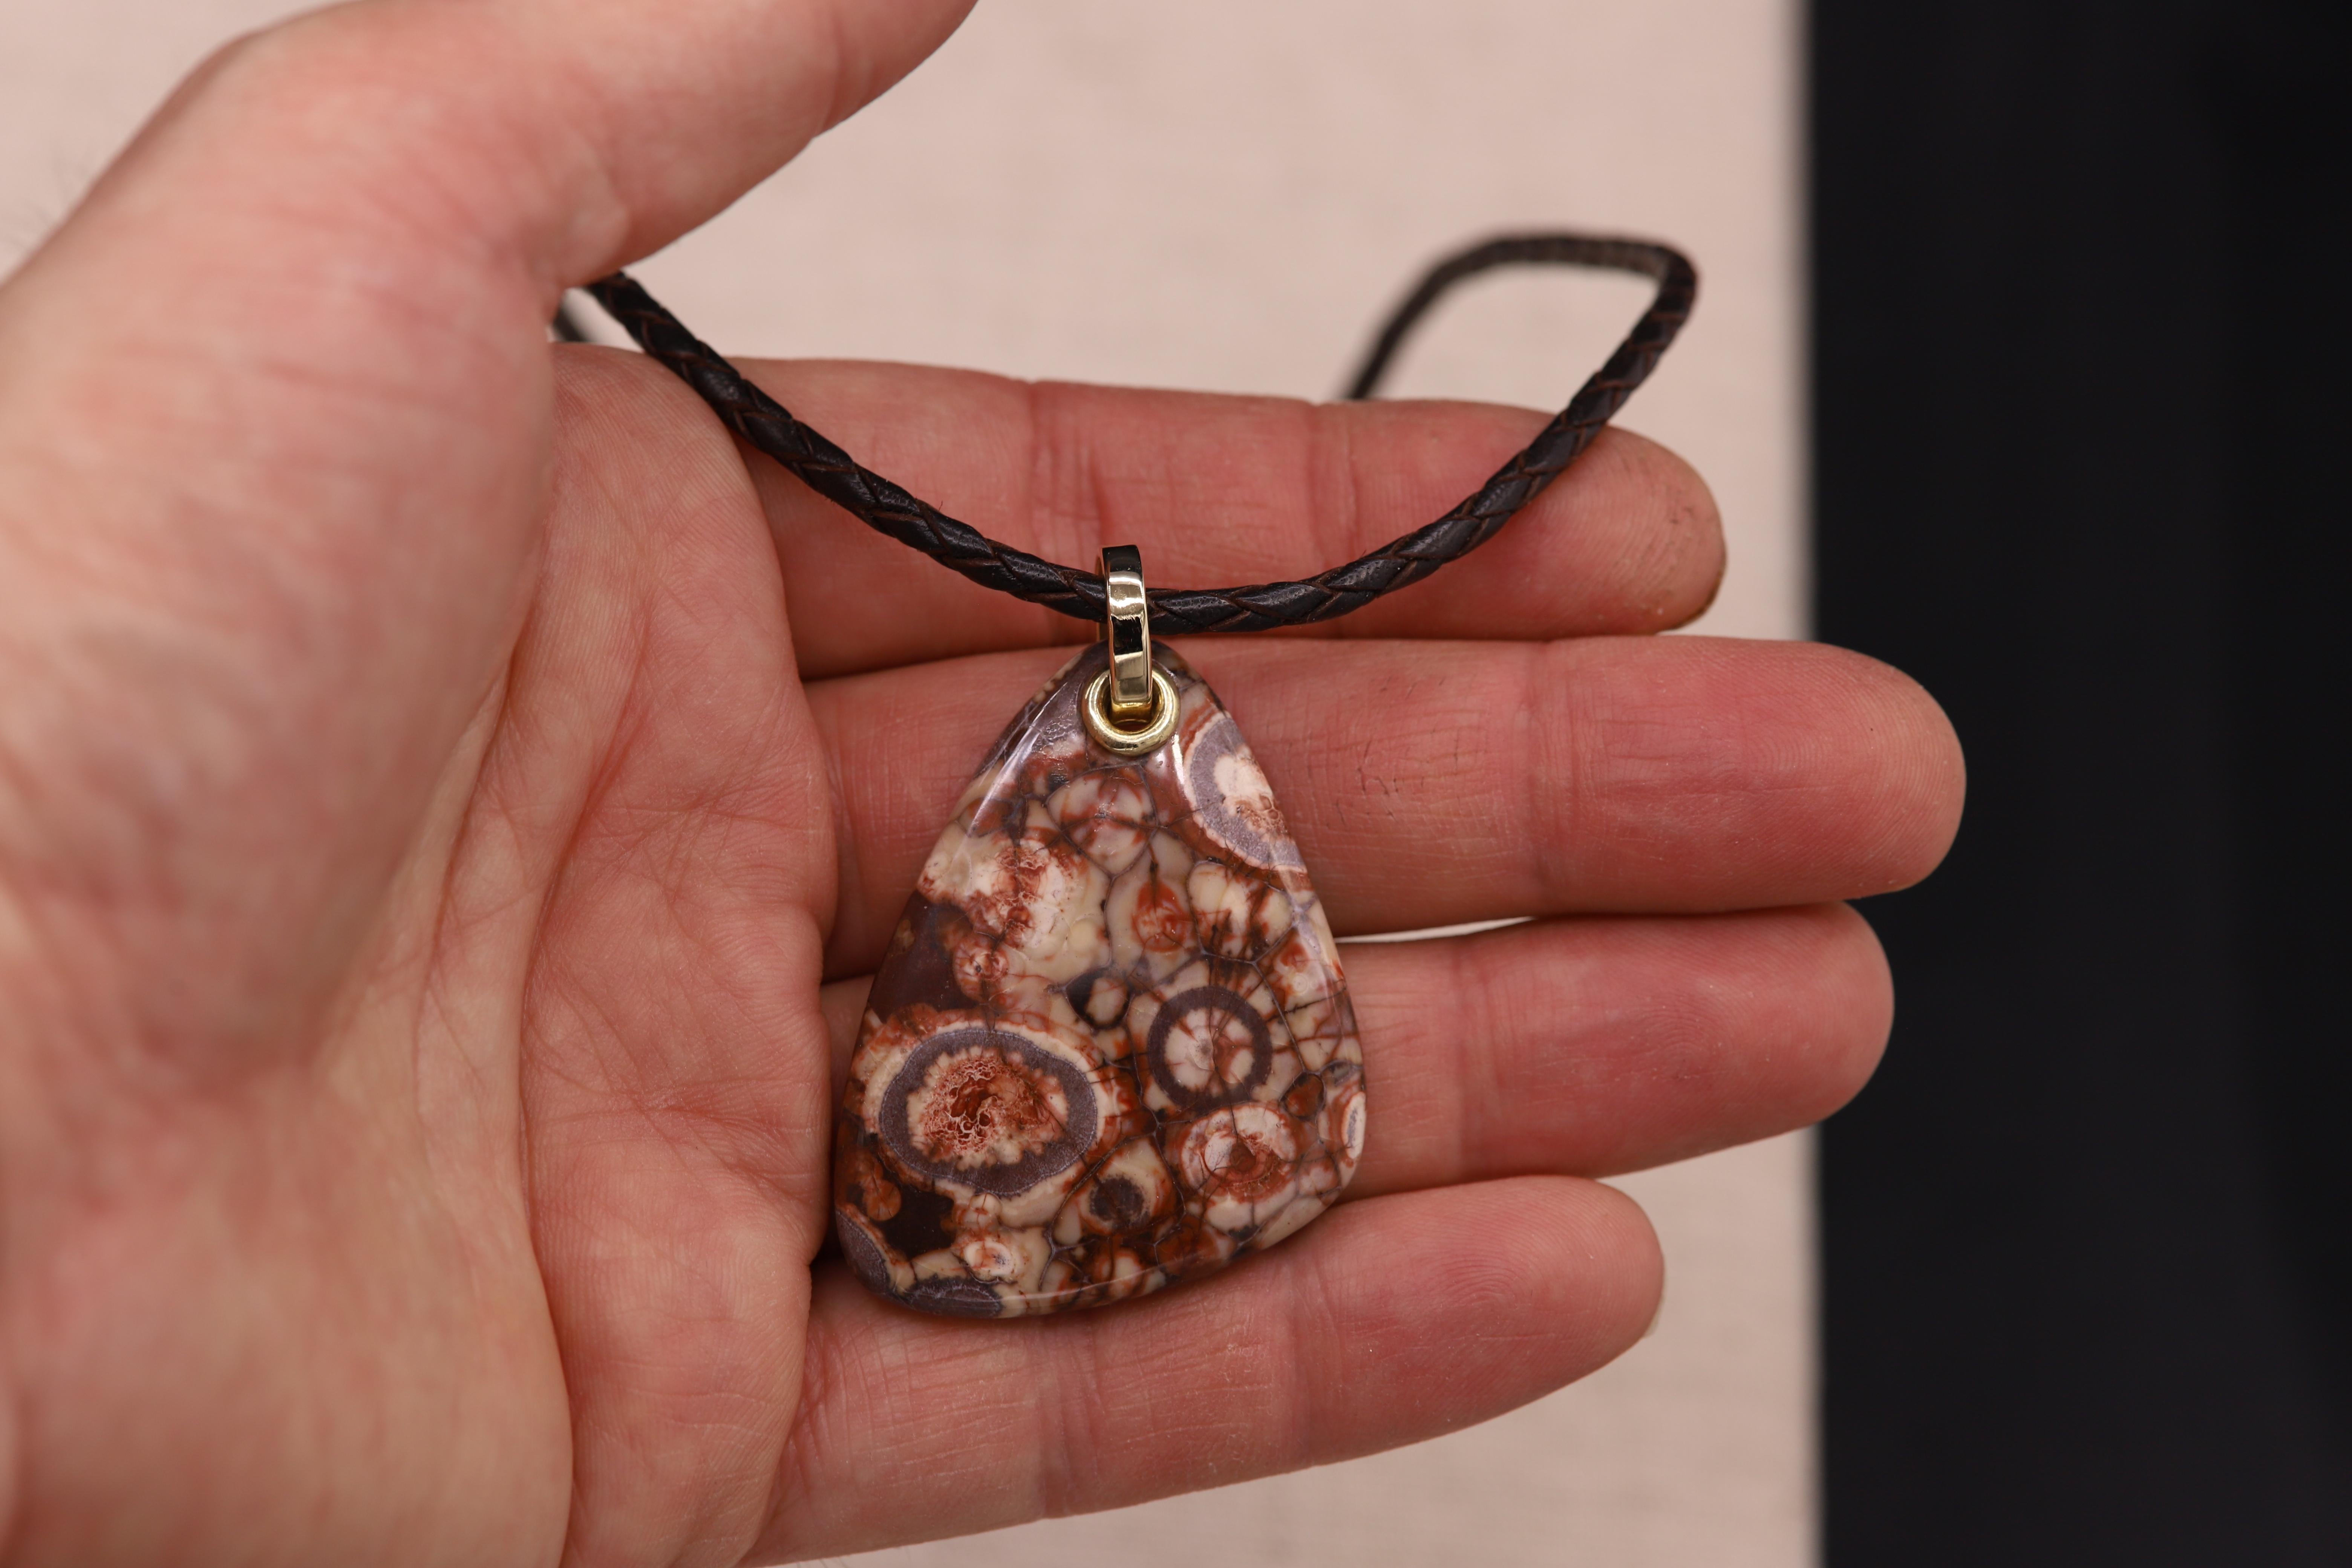 One-of-a kind- natural Beautiful Birds Eye Jasper stone Necklace.
all parts are 14k Yellow Gold and Italian-made leather cord.
Adjustable length 17' - 19' inch and all sizes in between, cord is dark brown.
Jasper stone is approx 1.75' x 1.5' inch -